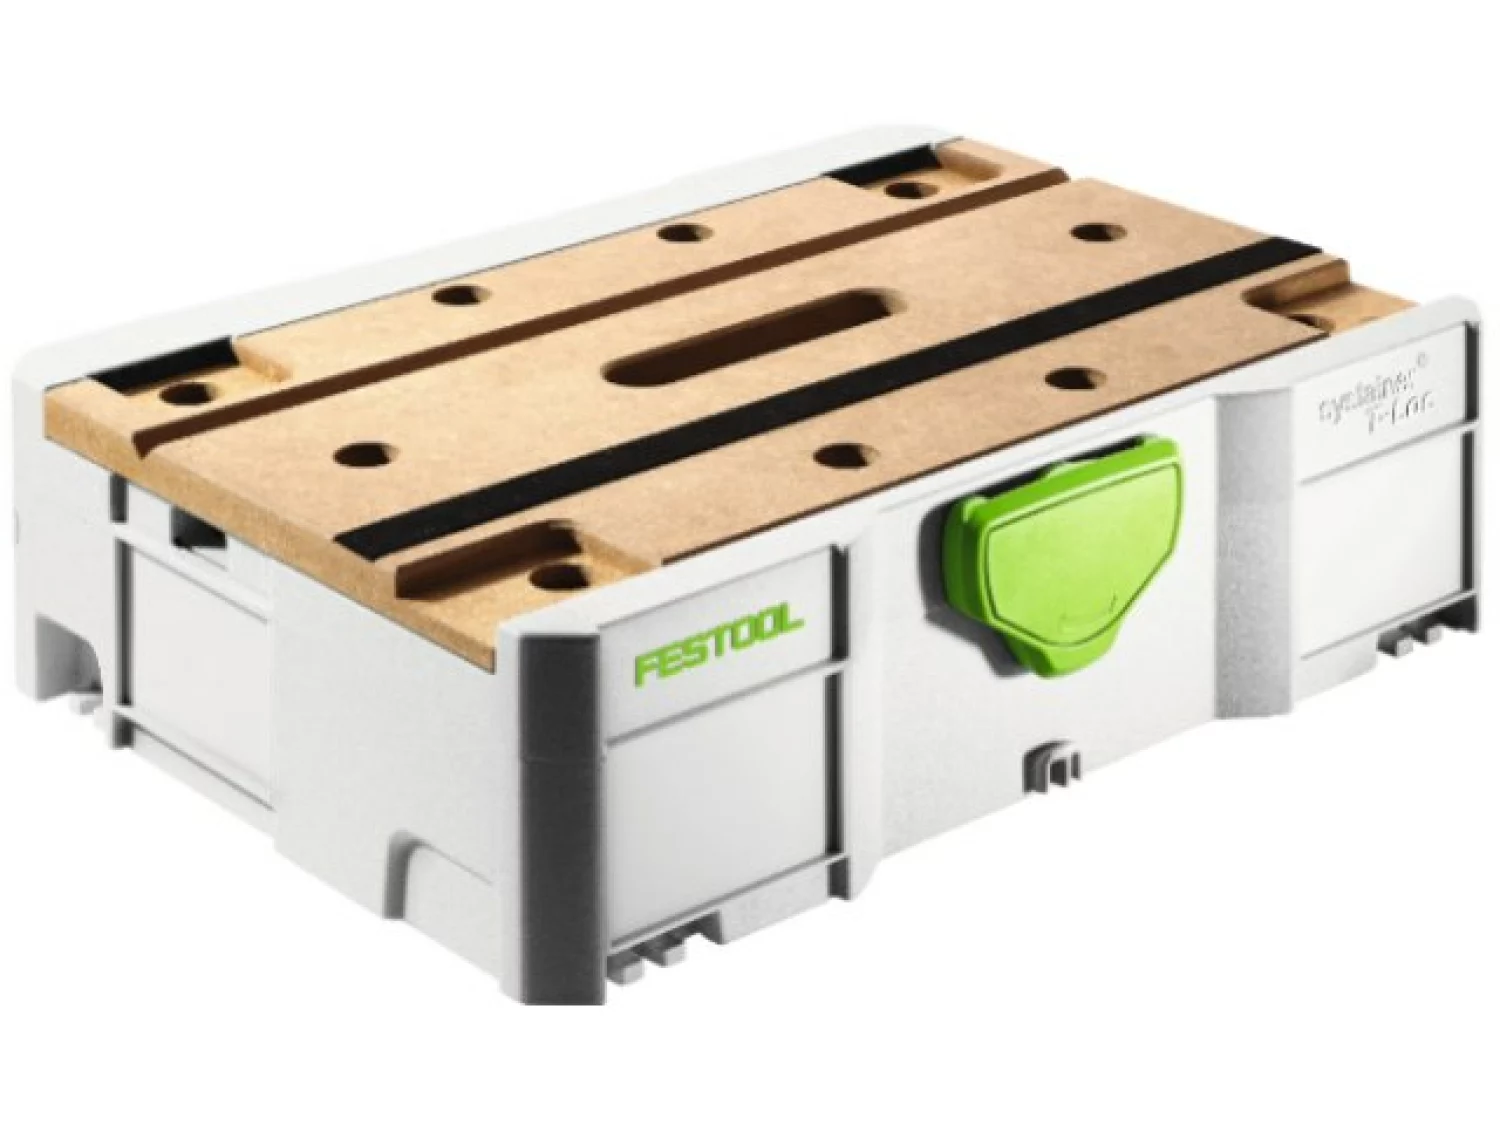 Festool 500076 SYS-MFT Systainer - 396 x 296 x 105mm-image